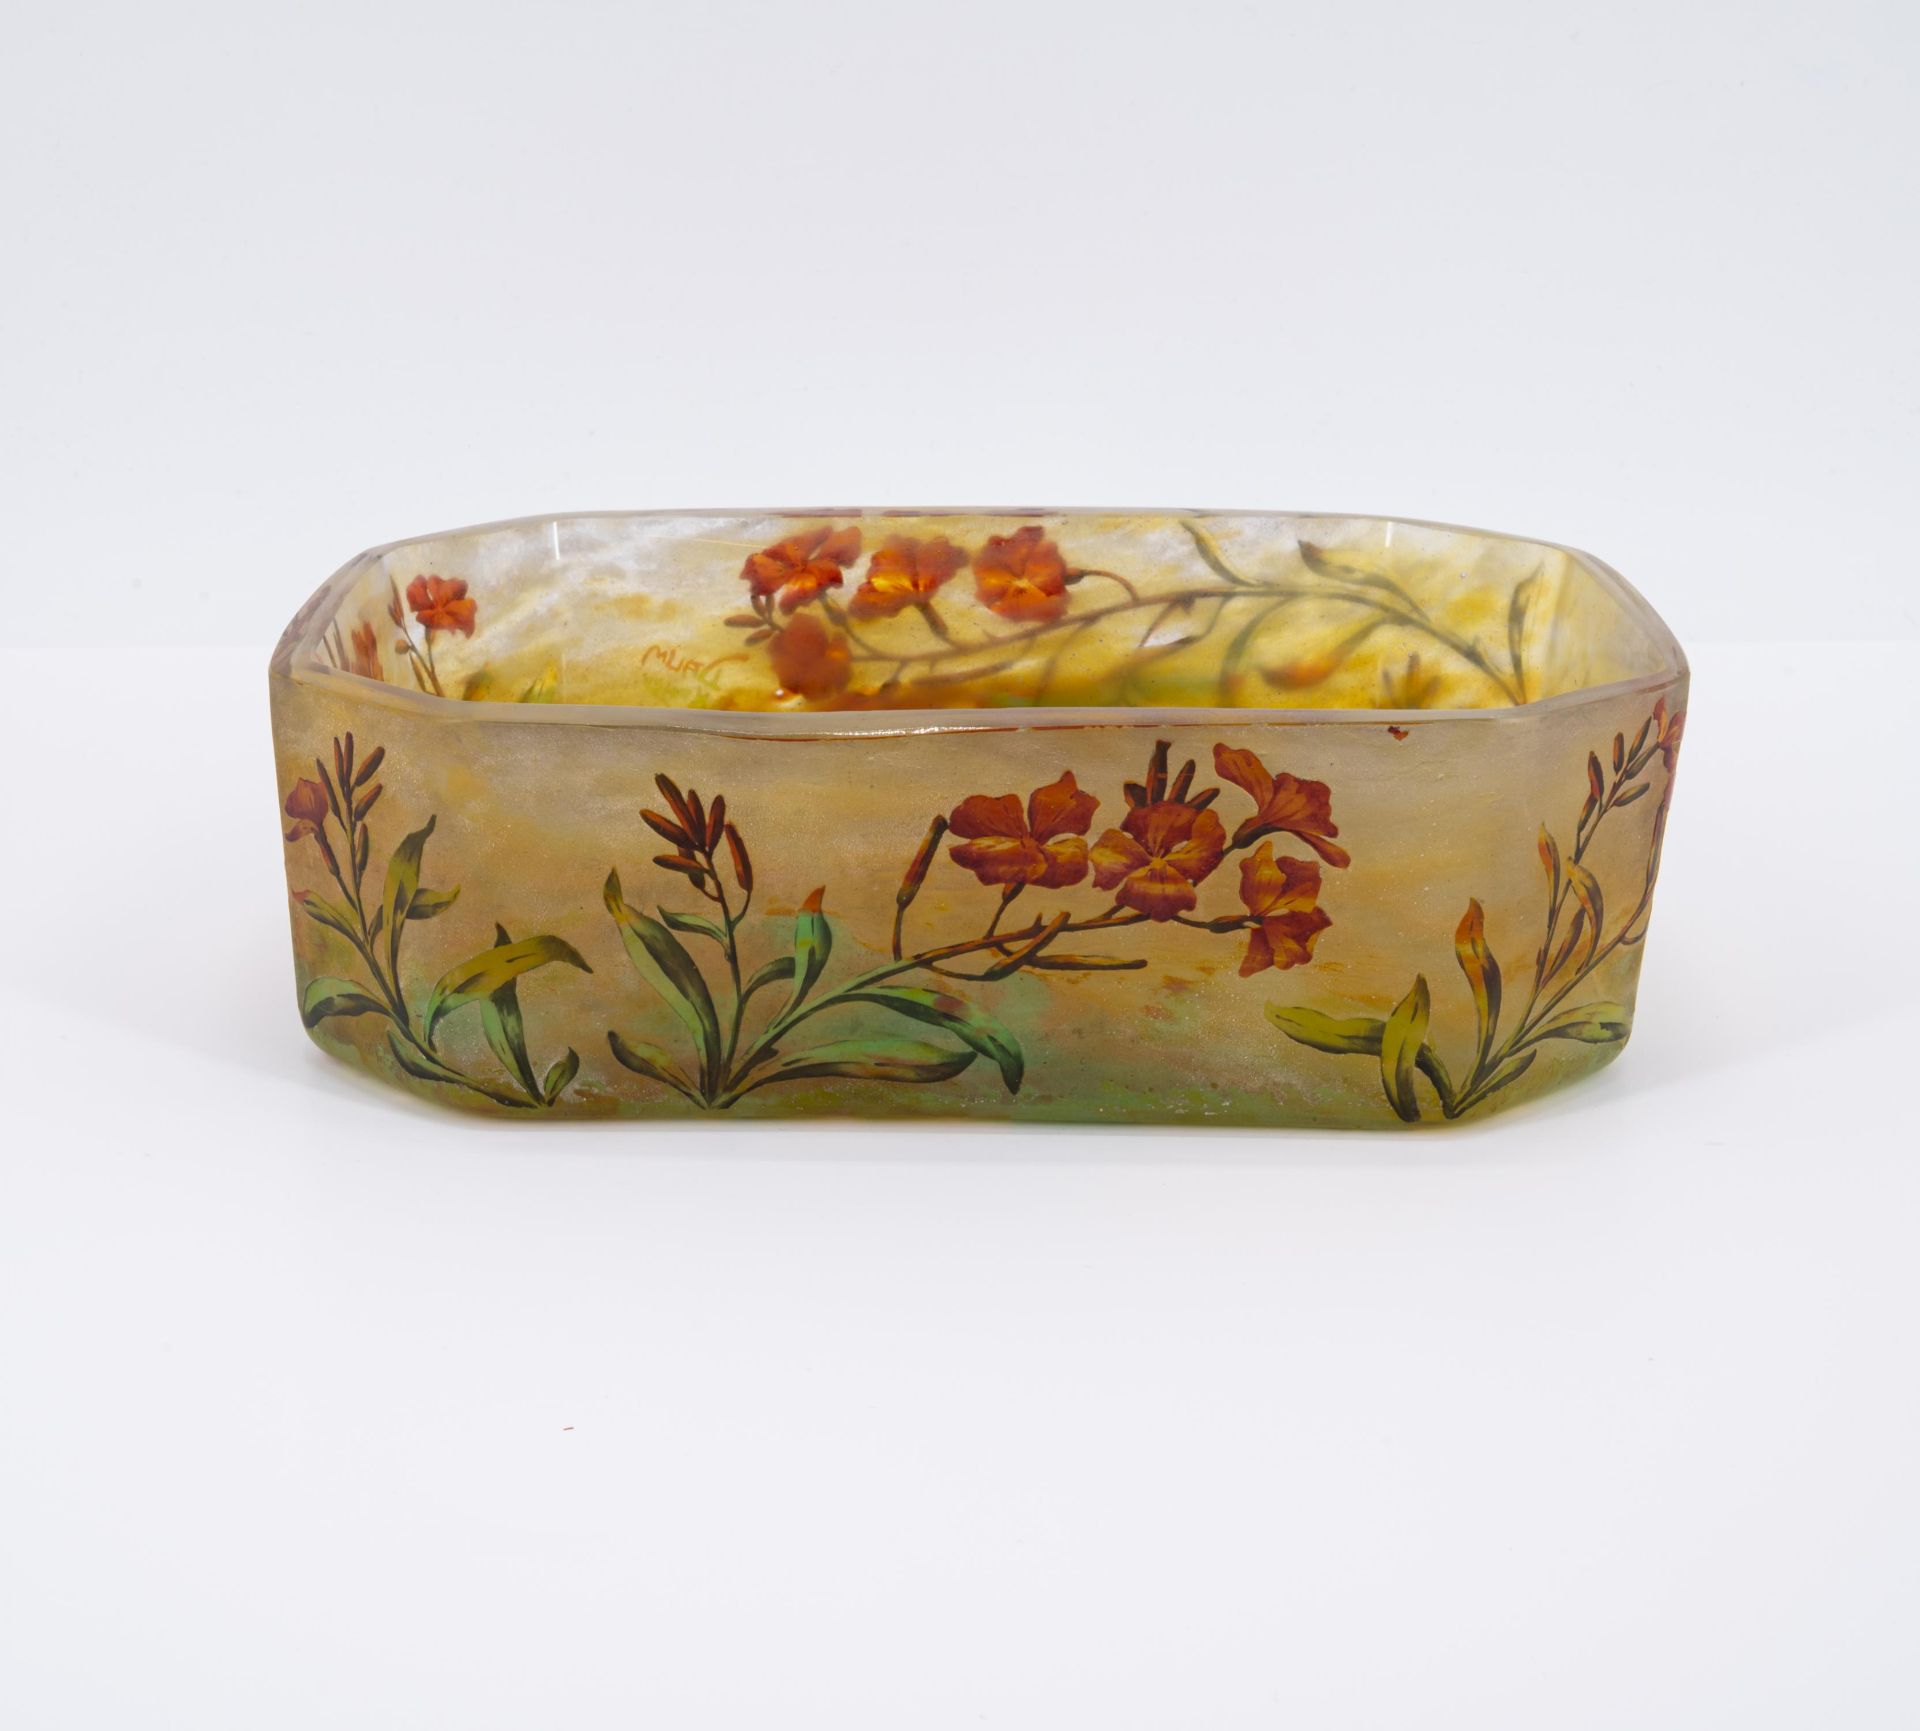 GLASS JARDINIERE WITH FLORAL DECOR - Image 3 of 7